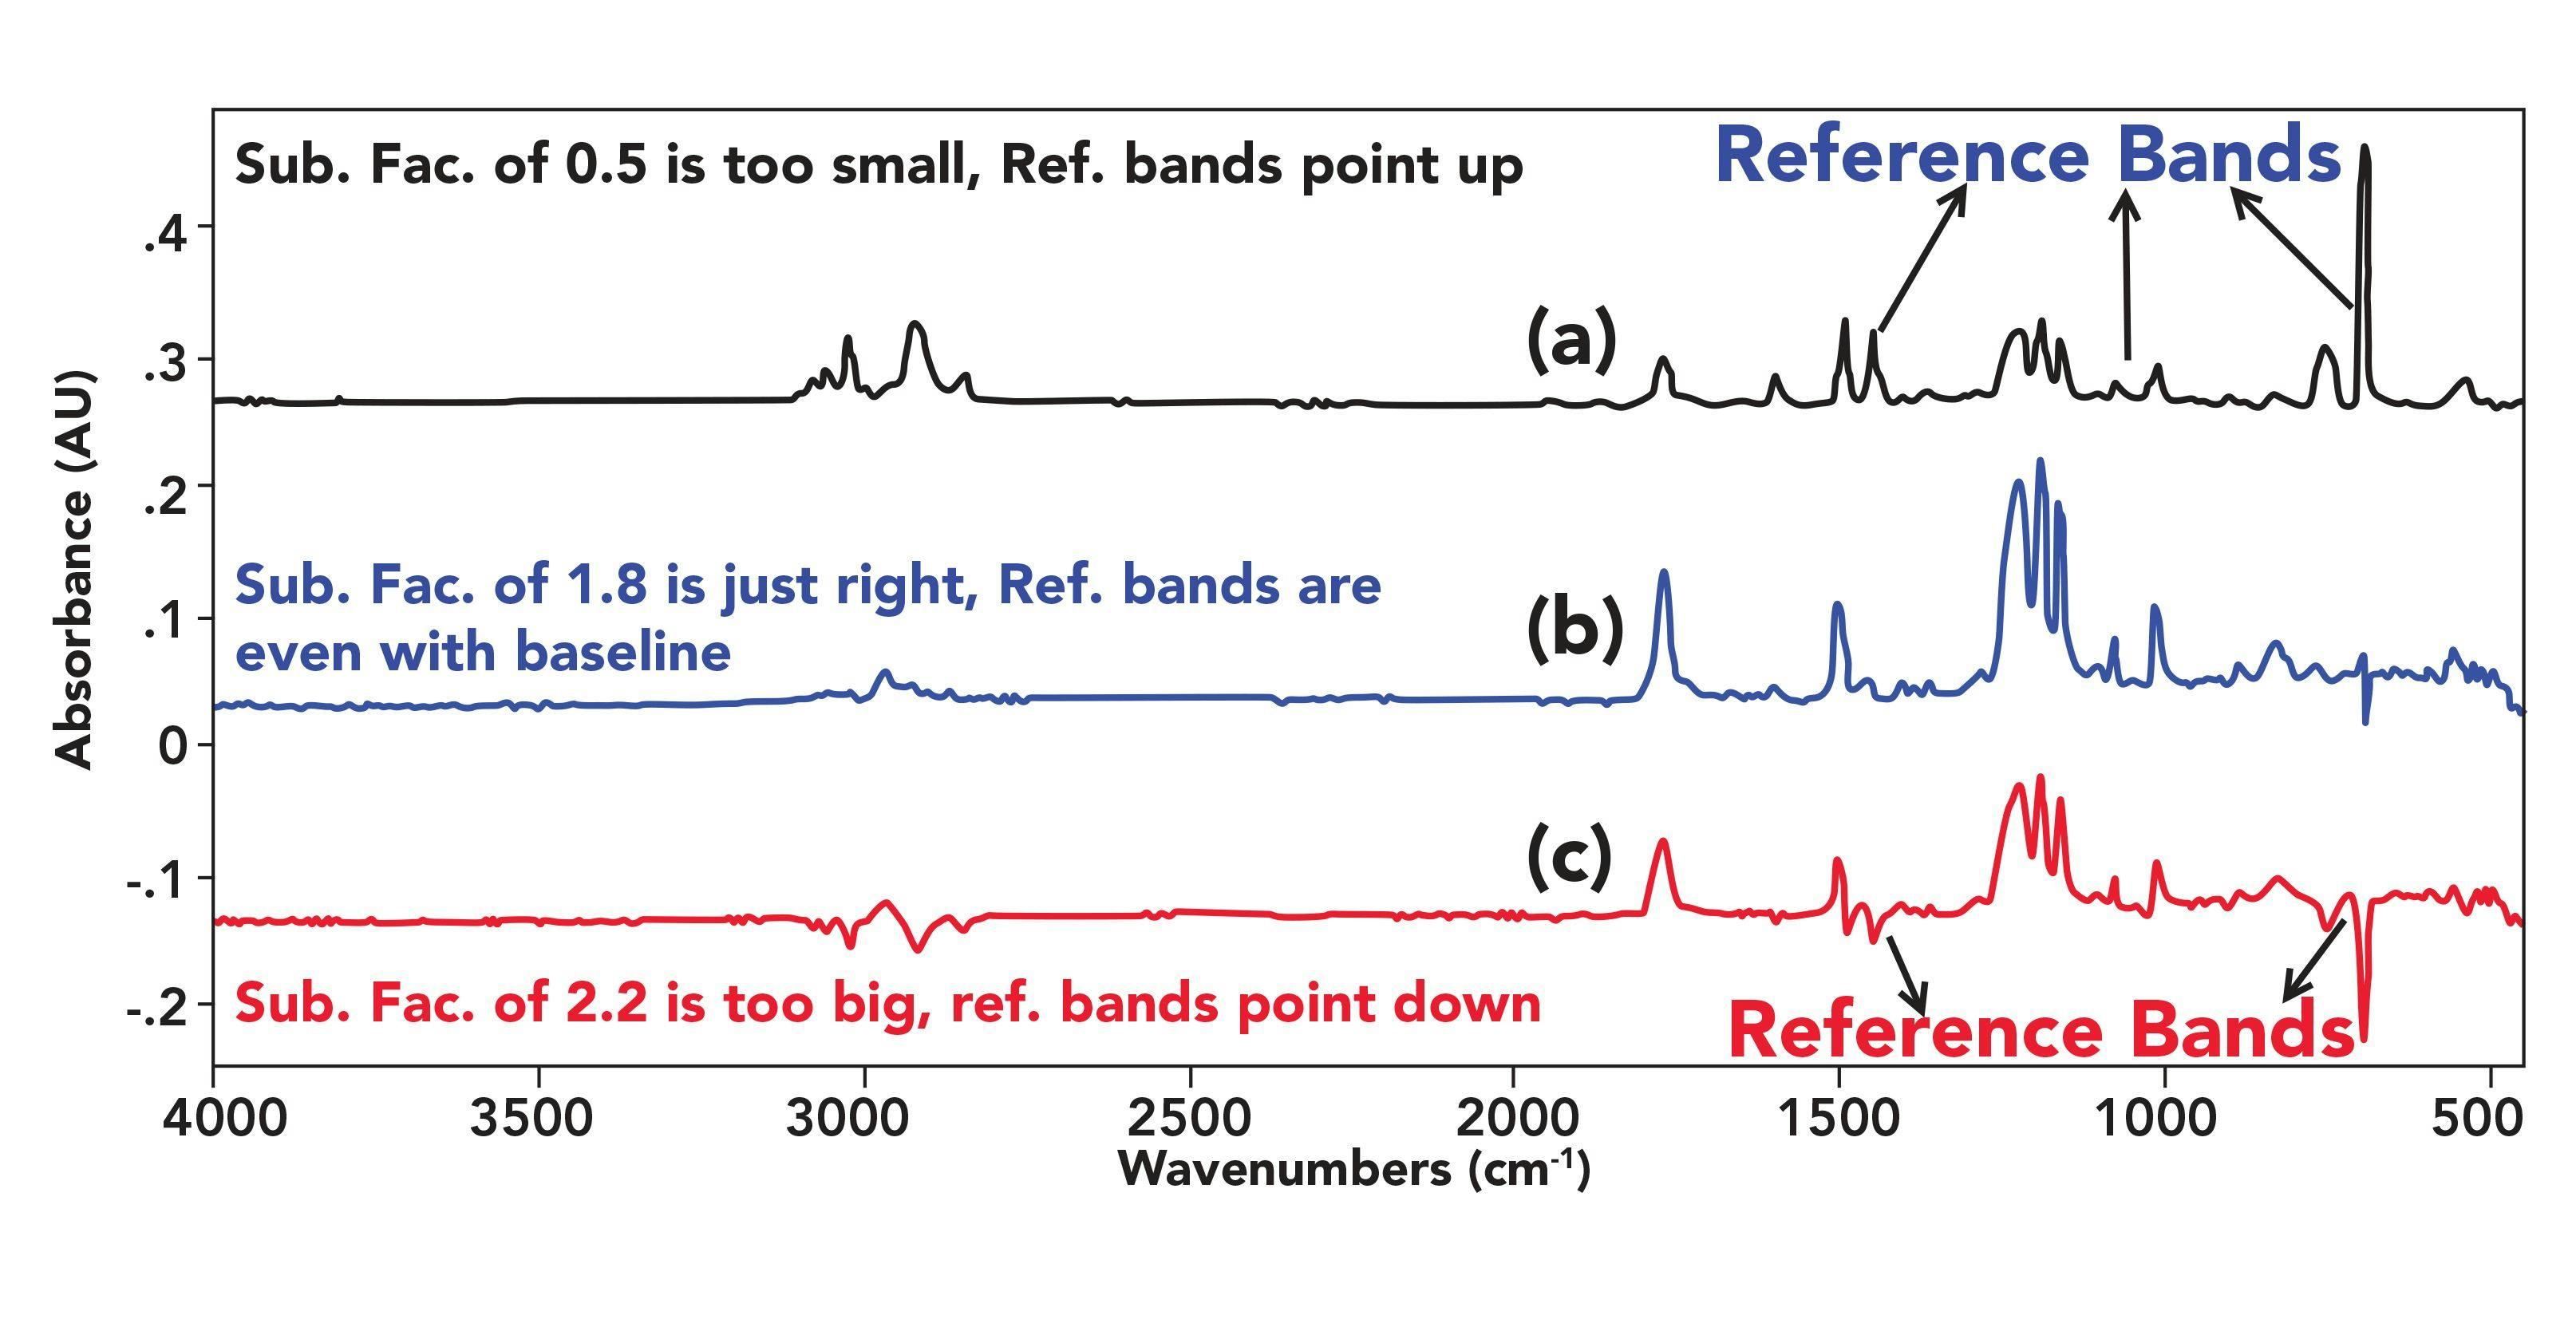 FIGURE 4: (a) Results spectrum where the subtraction factor of 0.5 is too small with reference bands pointing up. (b) A results spectrum where the subtraction of 1.8 is just right with reference bands flat with the baseline. (c) A results spectrum where the subtraction factor of 2.2 is too big with reference peaks pointing down. The reference spectrum was polystyrene.